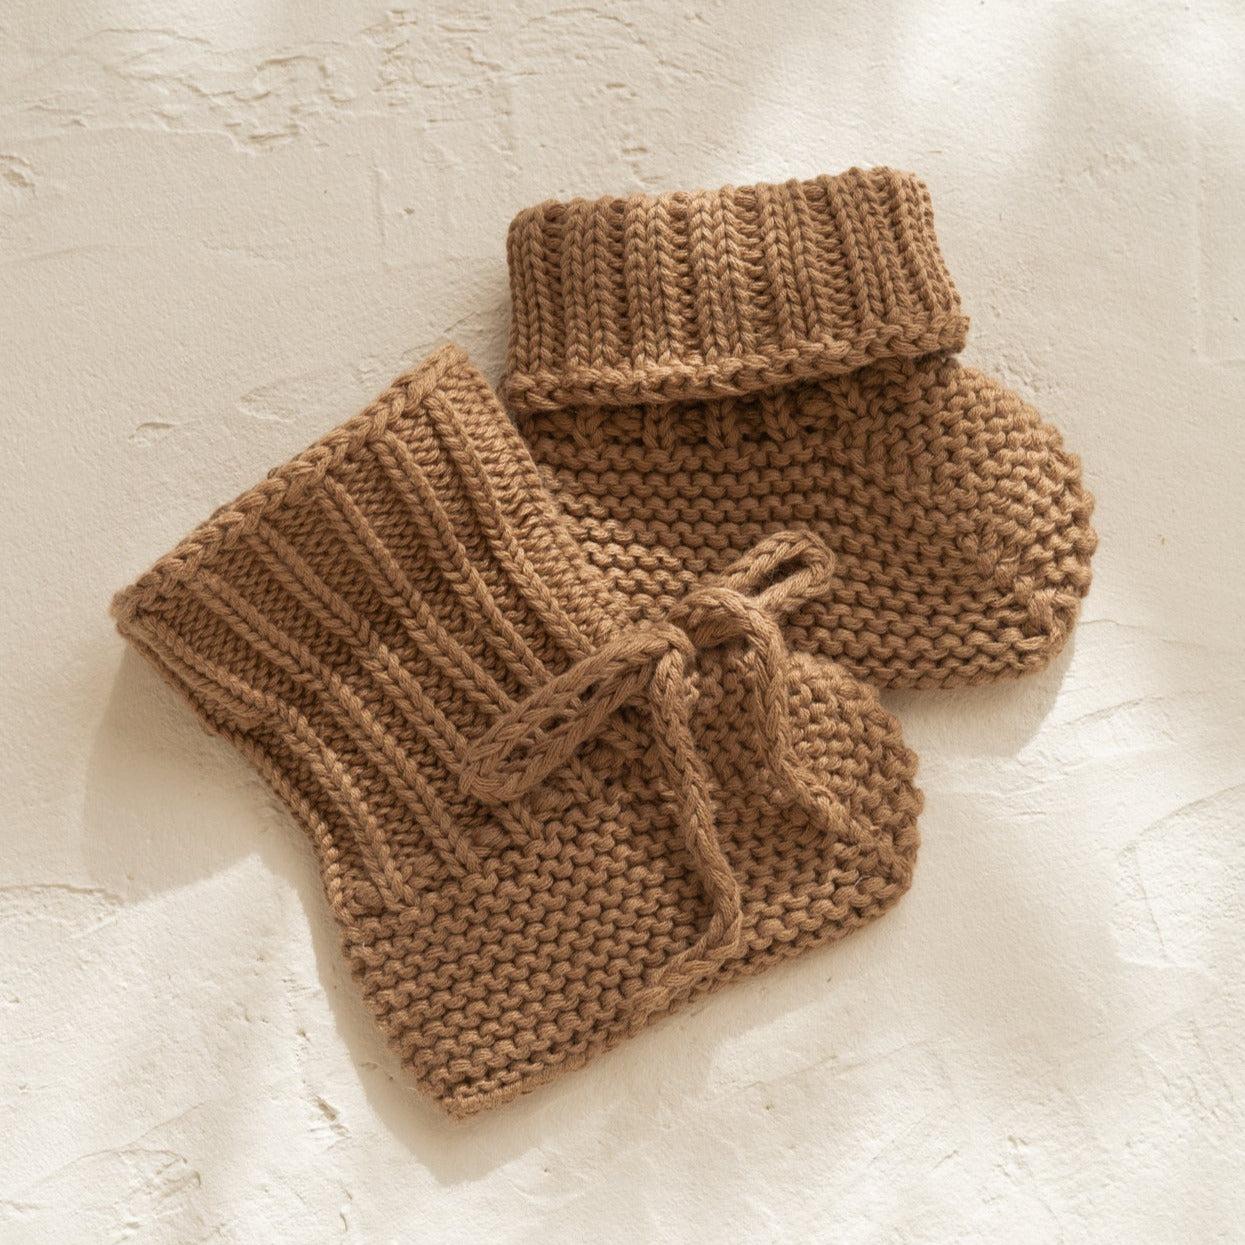 A pair of Illoura the Label organic cotton knitted baby booties in chocolate on a white surface.